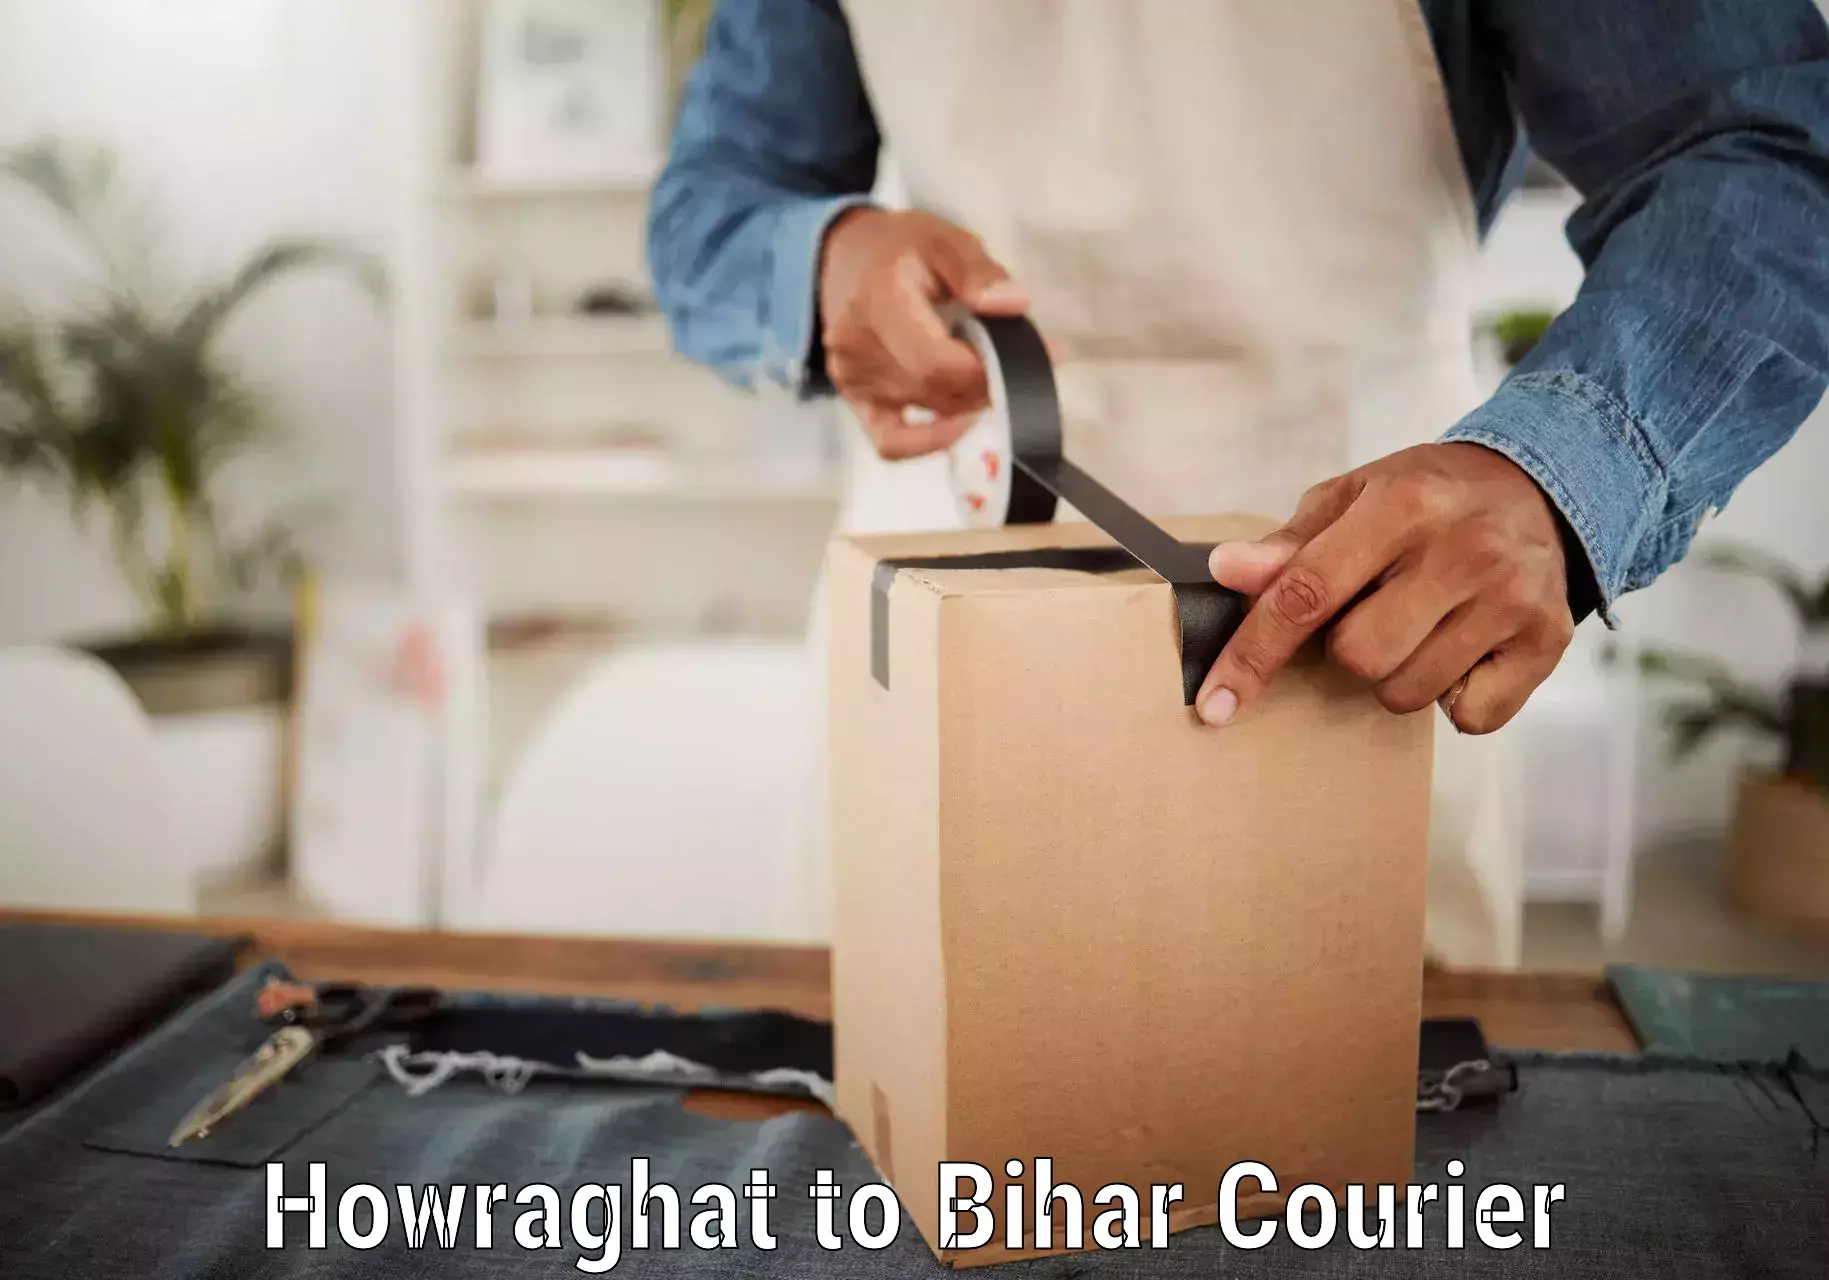 Corporate courier solutions Howraghat to Tekari